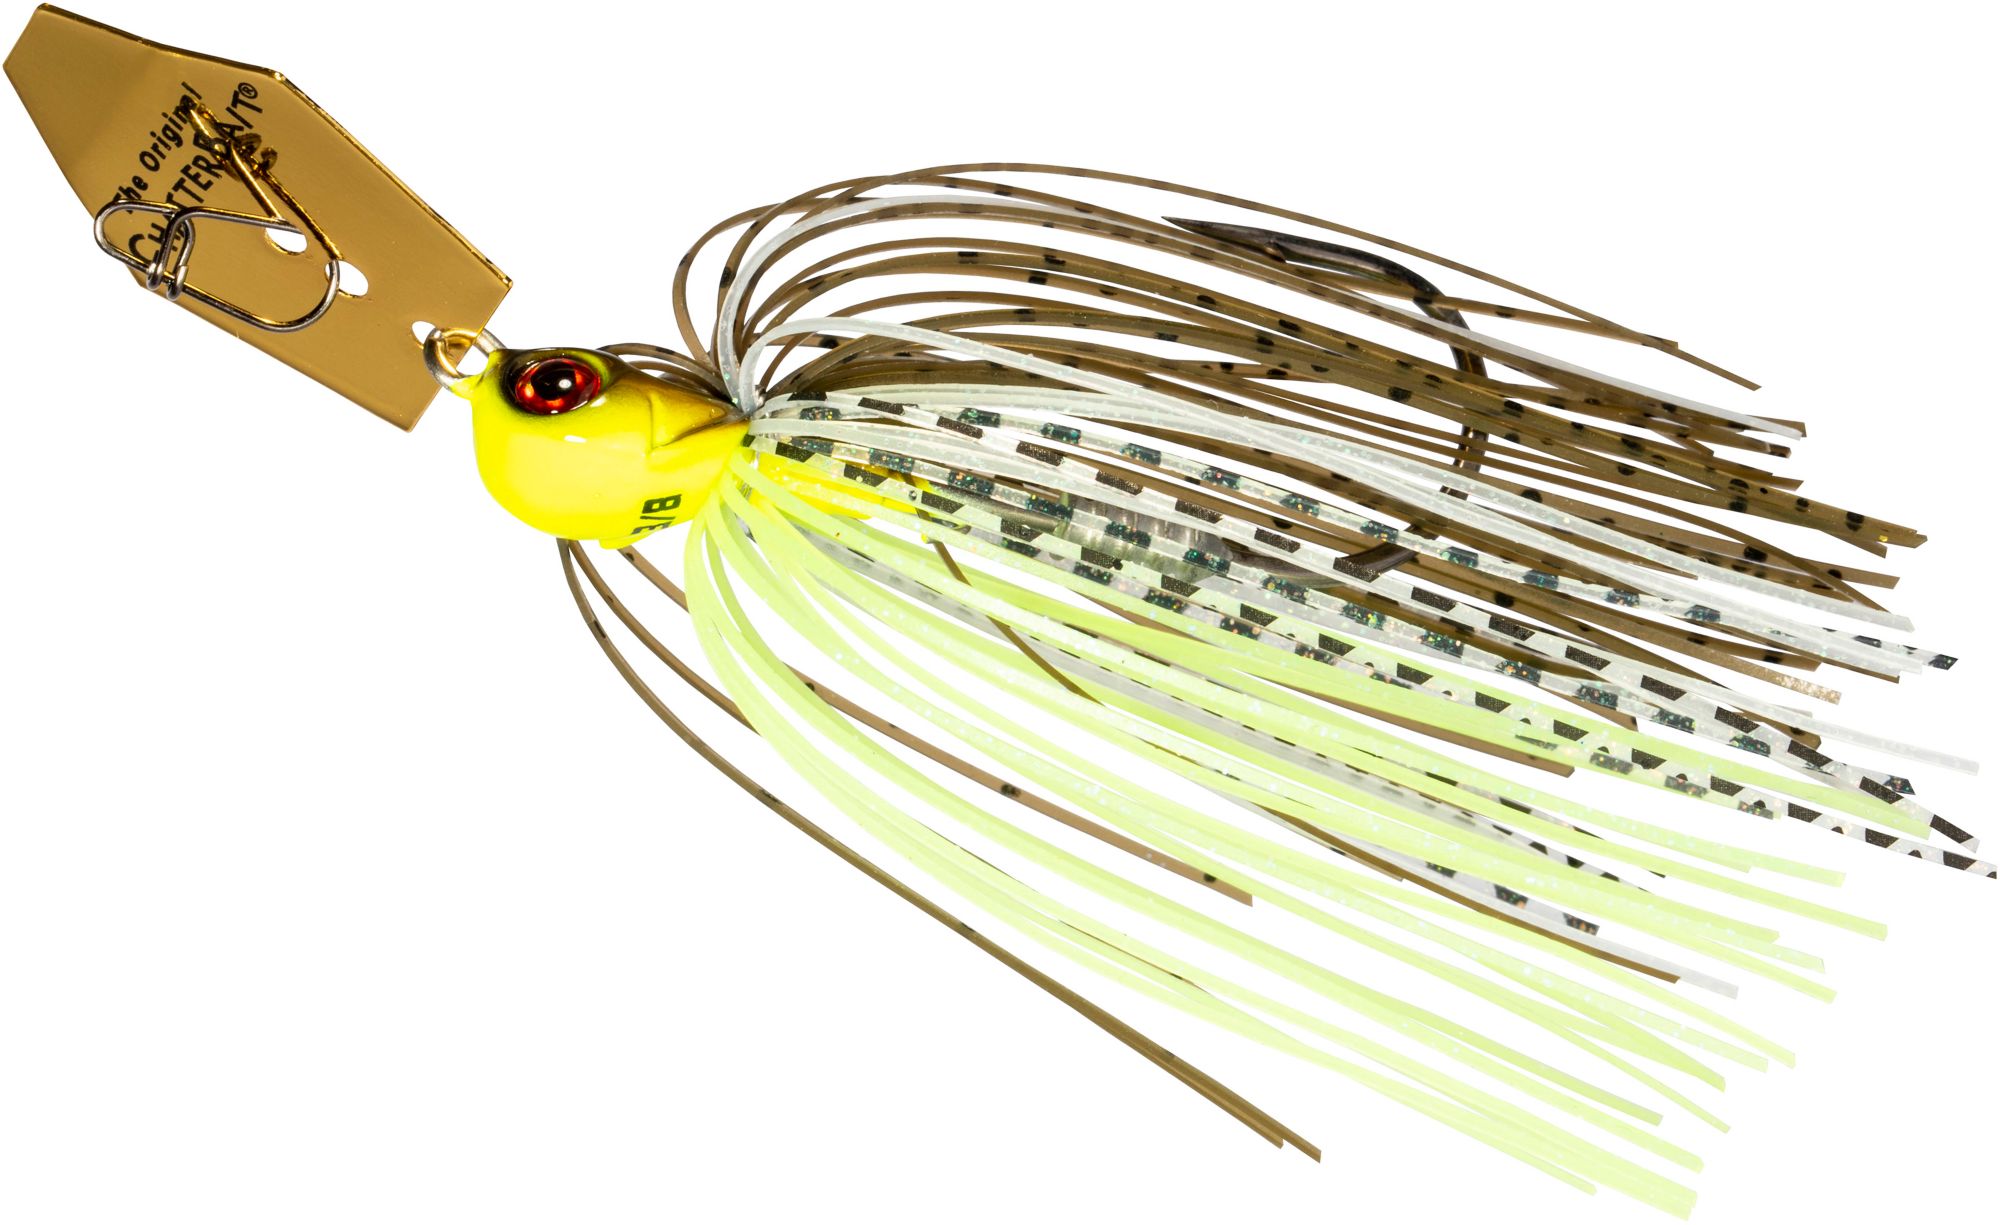 Shop Fishing Lures & Fishing Baits - Best Price at DICK'S